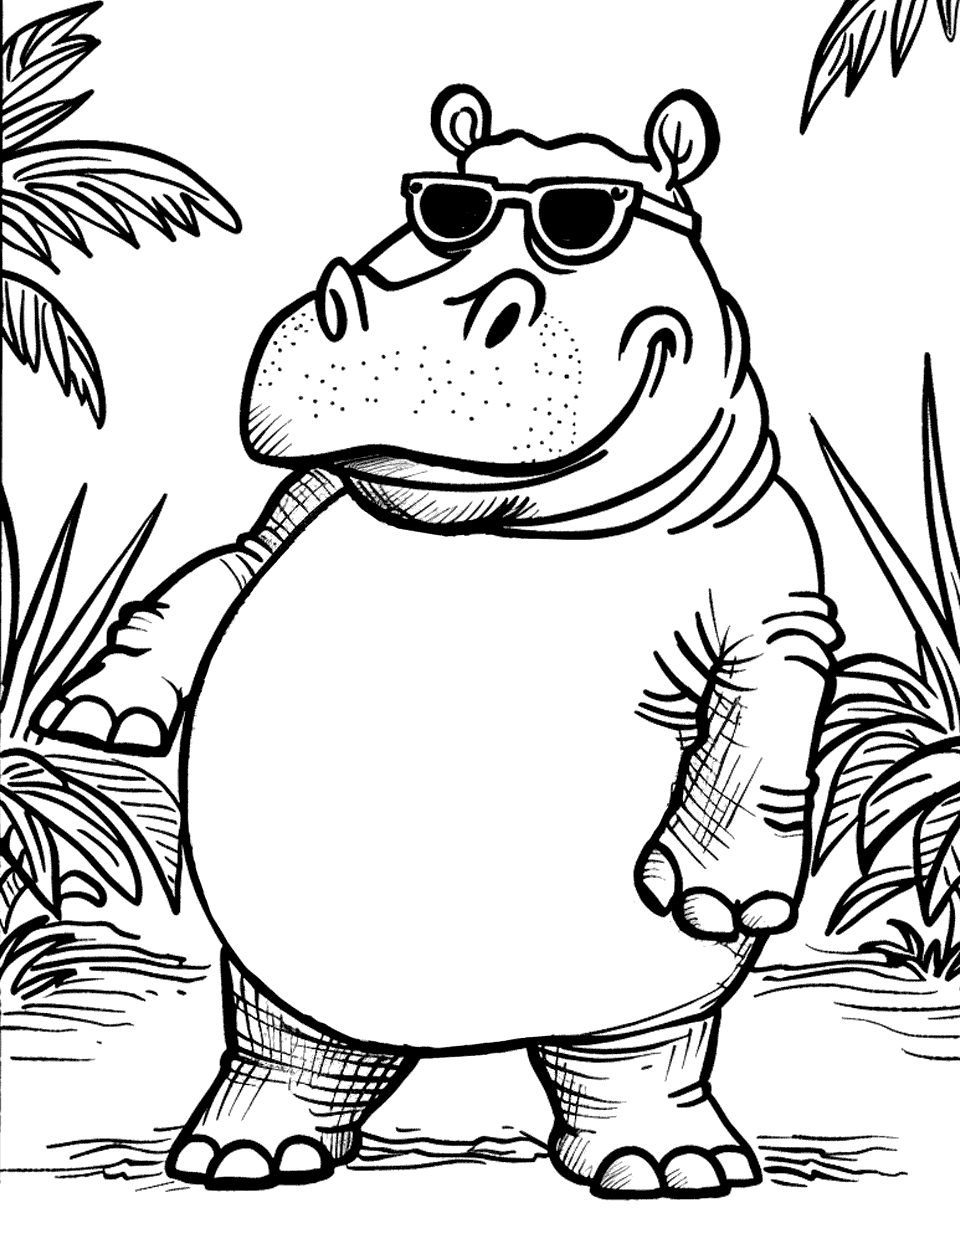 Hippo Dance Party Coloring Page - Hippo wearing sunglasses, dancing and grooving to music in the jungle.